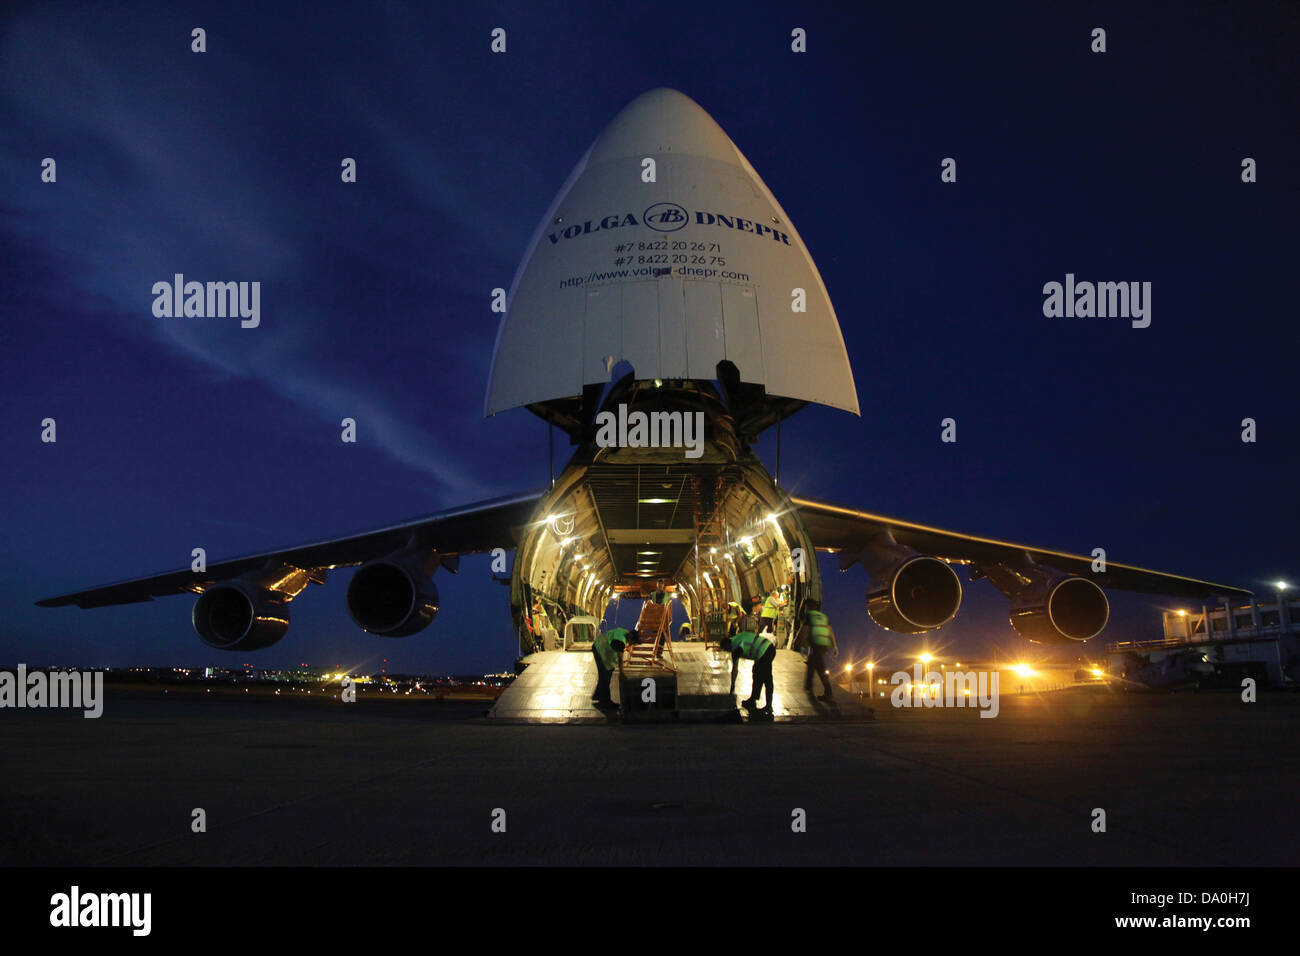 The crew of a Russian Antonov An-124 cargo aircraft prepares to load three CH-46E Sea Knight helicopters June 17, 2013 at Marine Corps Air Station Futenma, Japan. Stock Photo